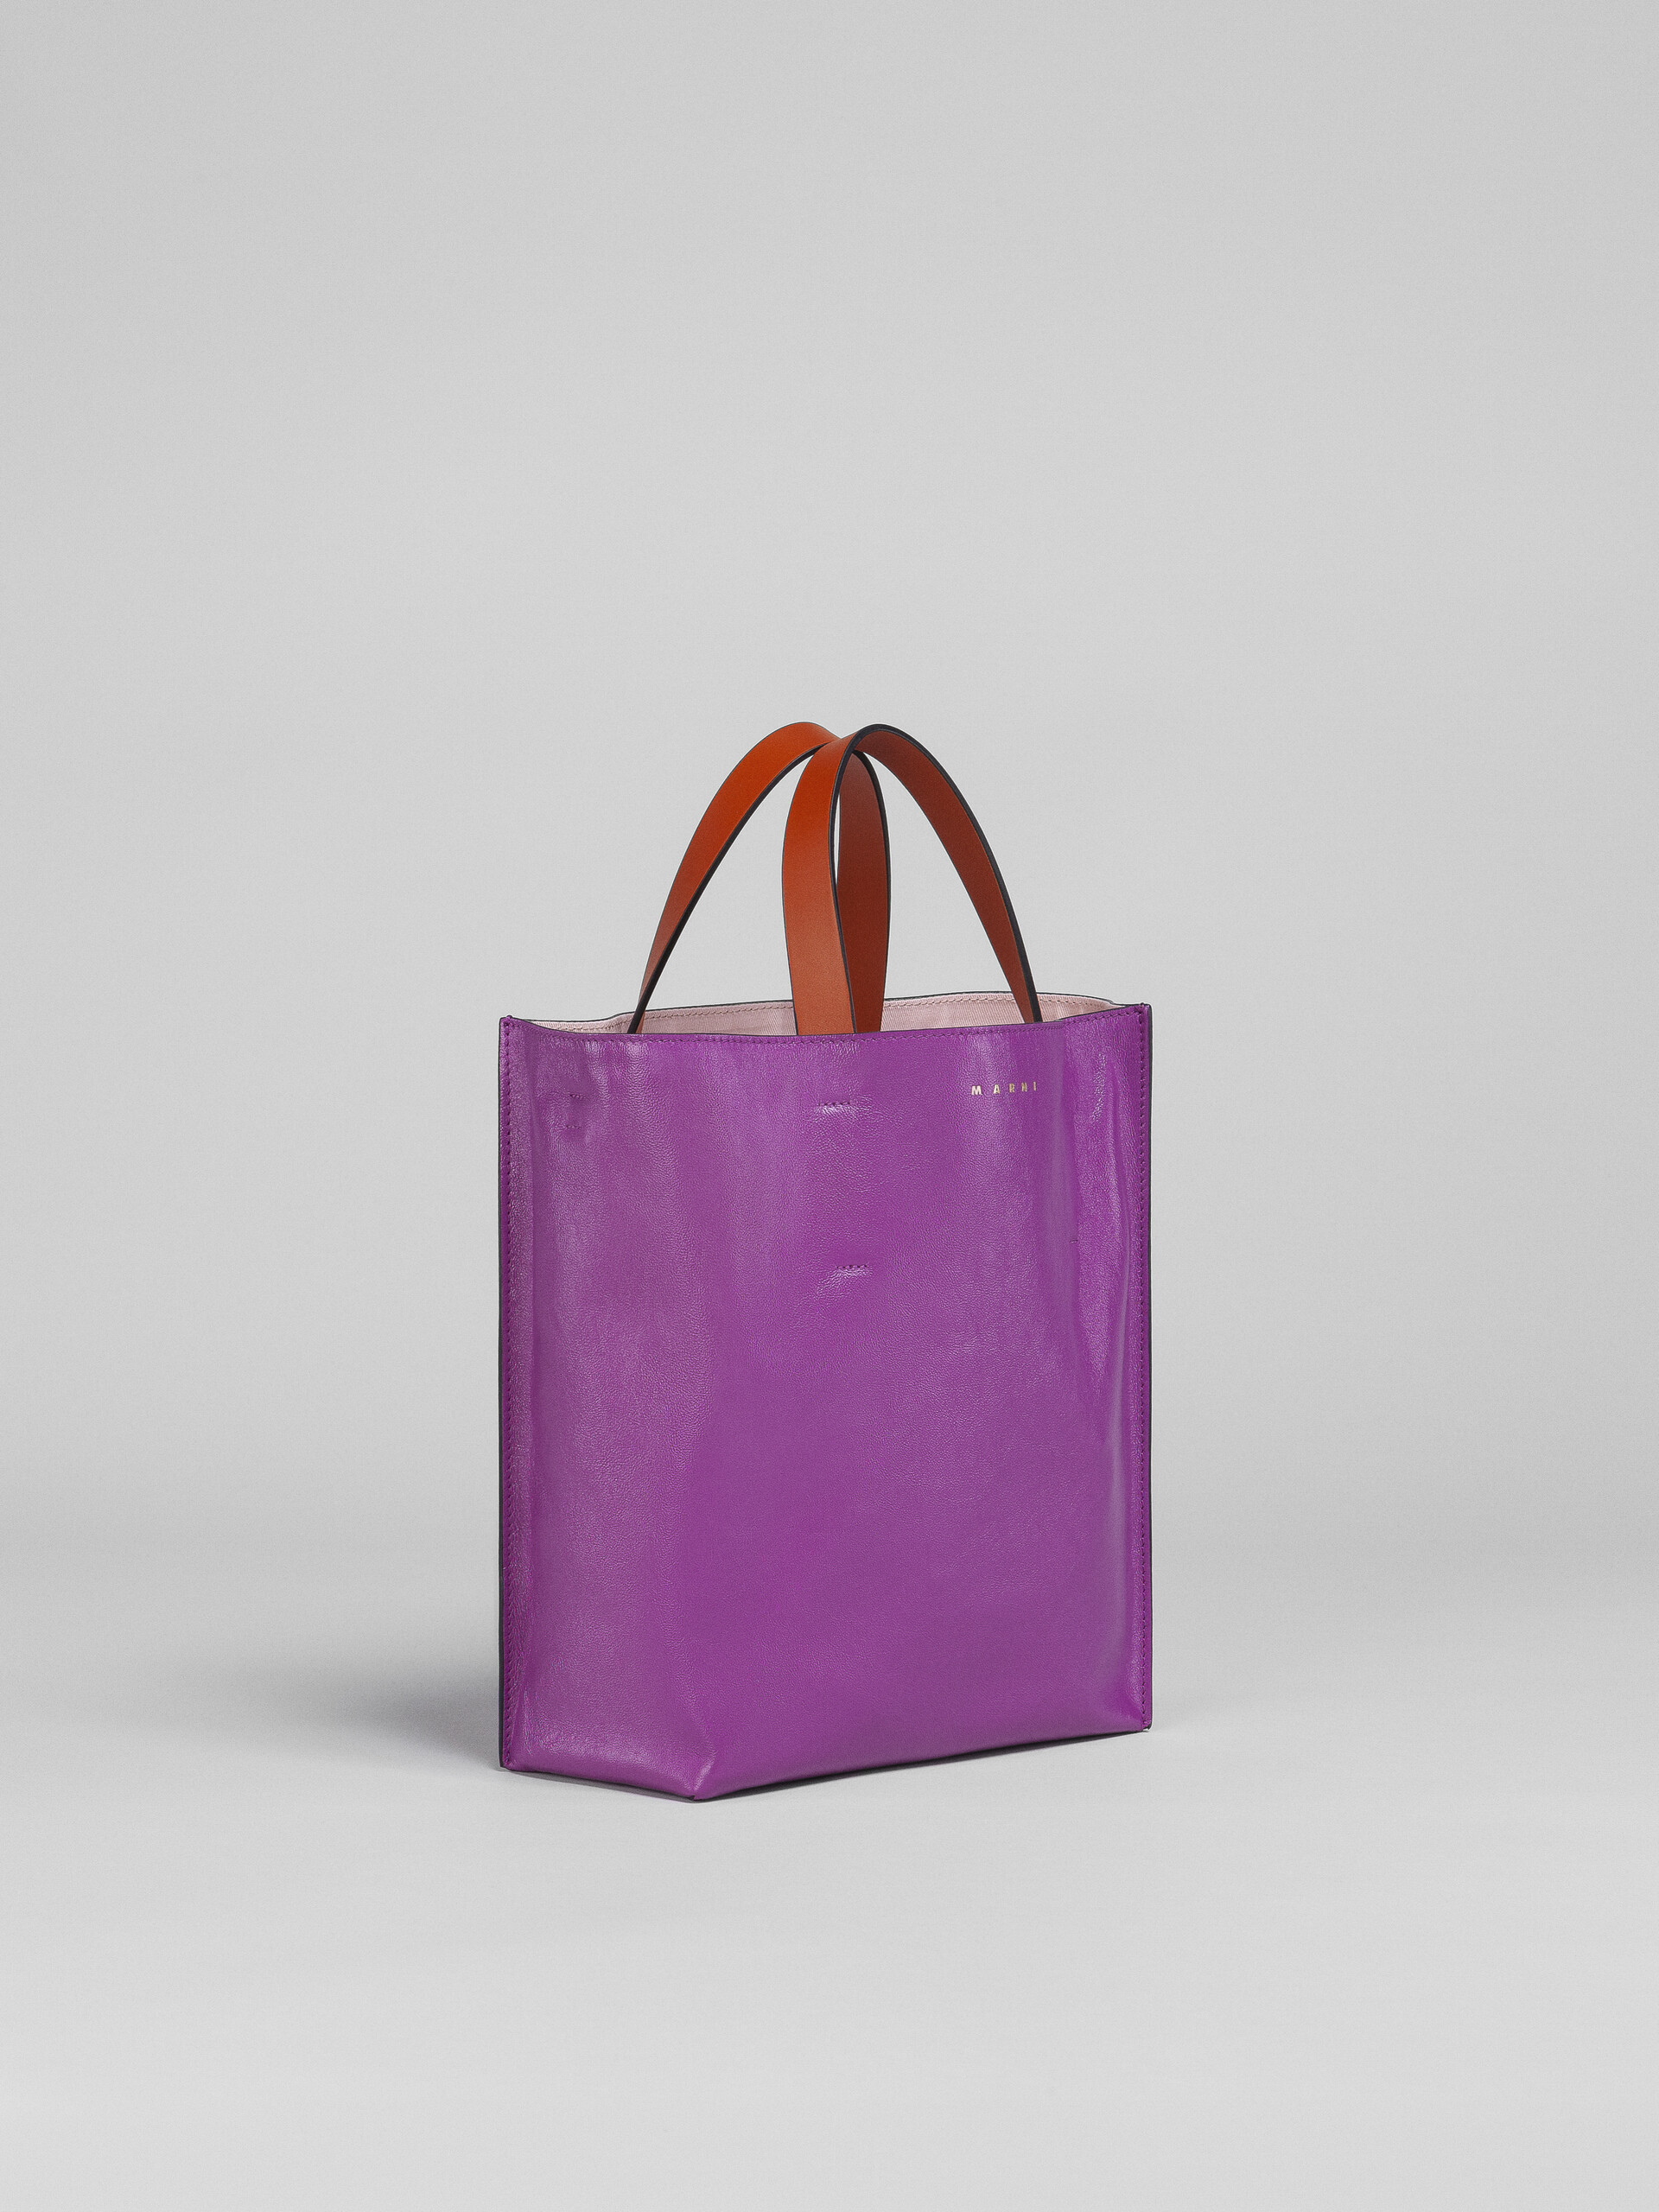 MUSEO SOFT small bag in fuchsia and green leather - Shopping Bags - Image 6